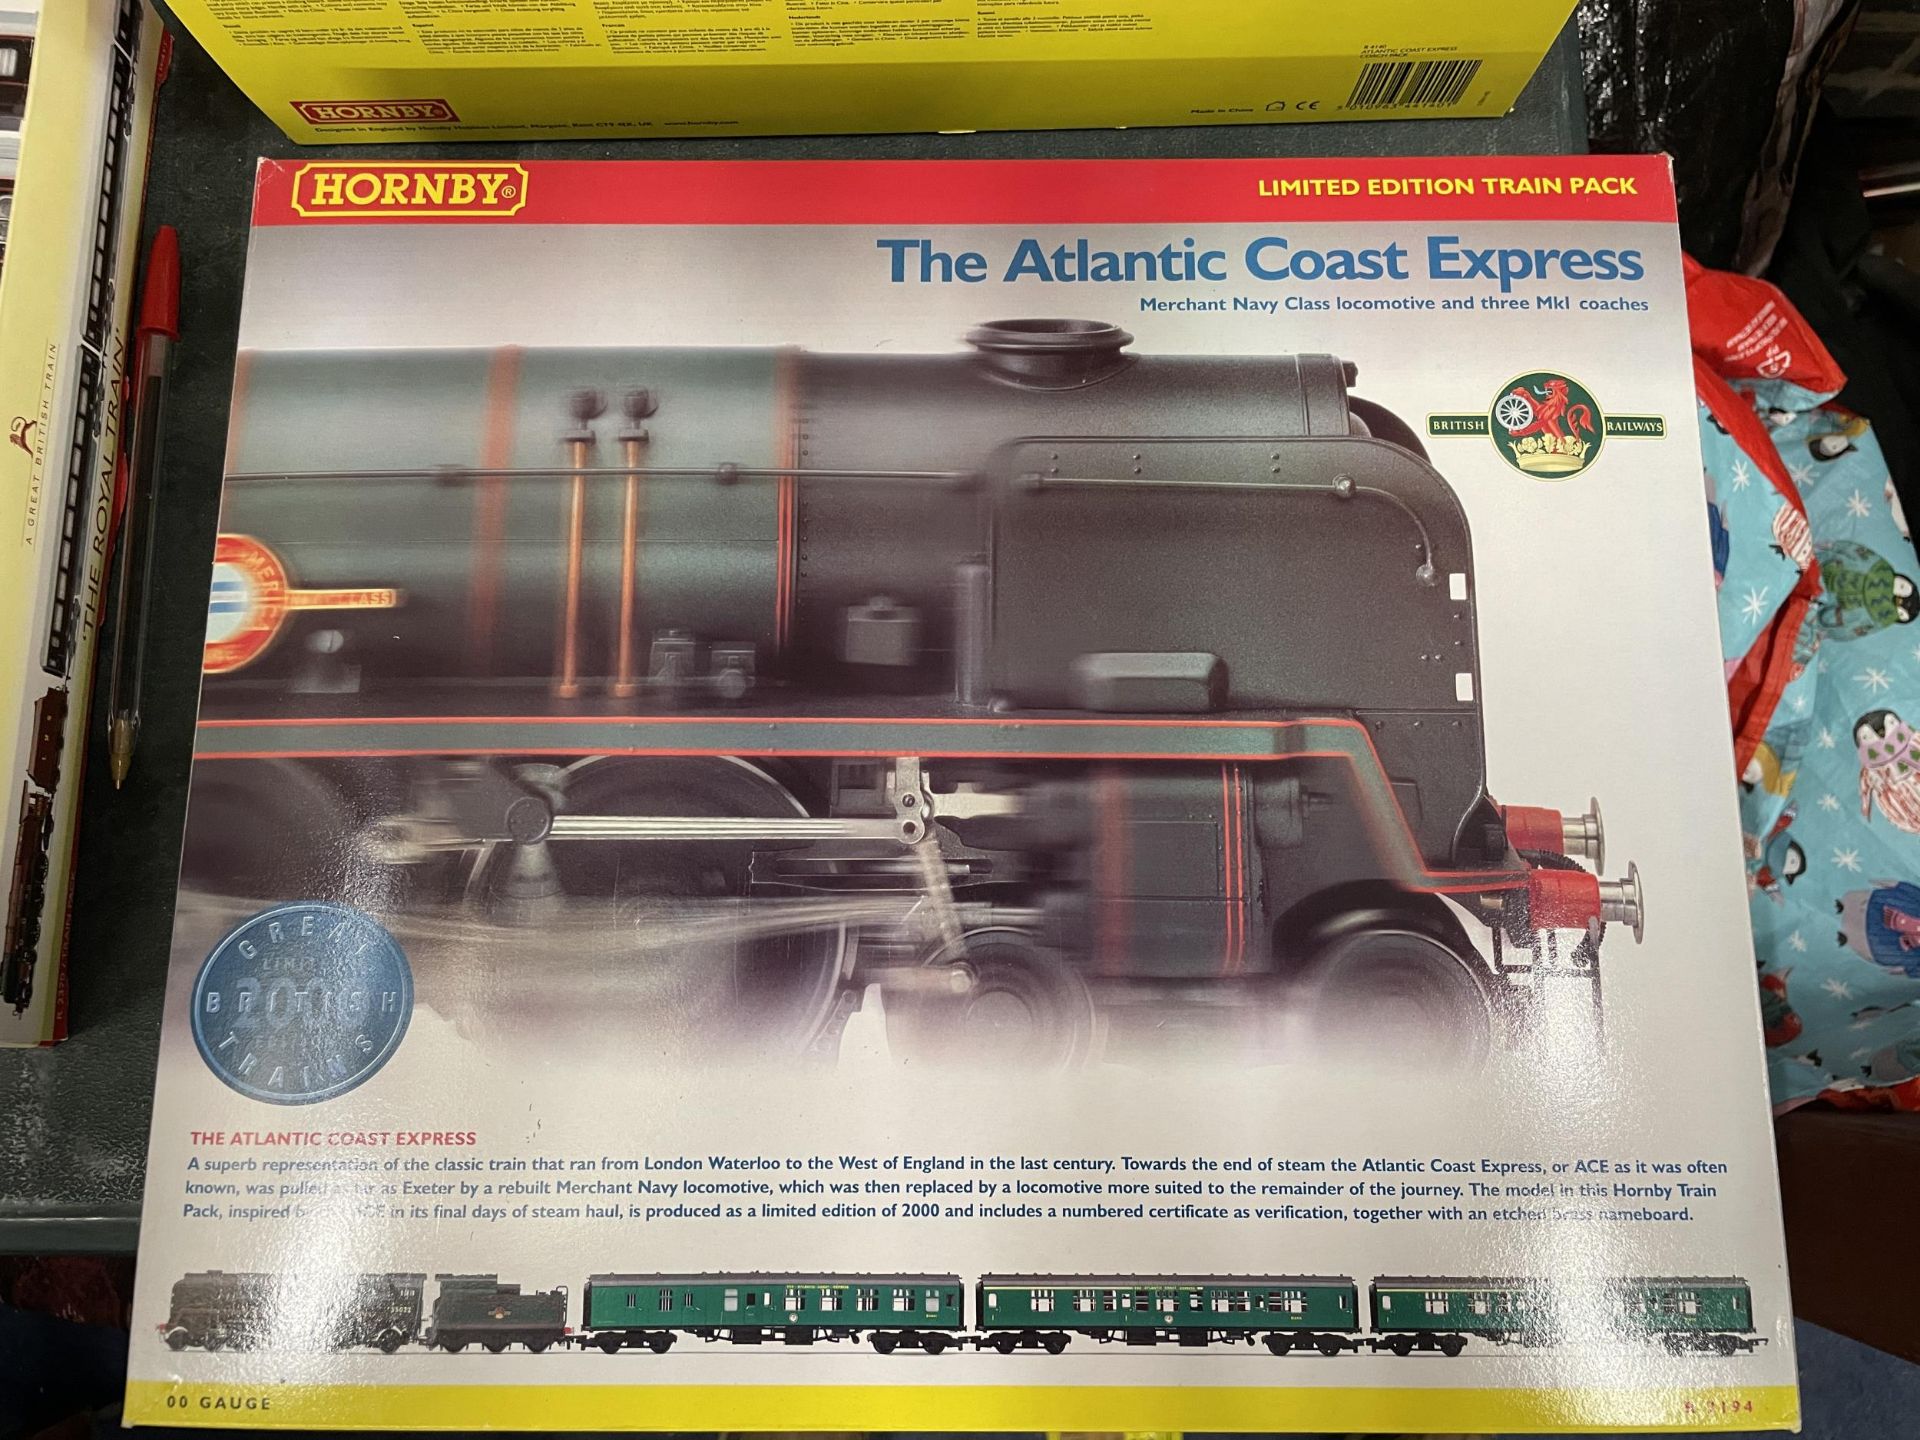 A HORNBY R 2194 'THE ATLANTIC COAST EXPRESS' LIMITED EDITION TRAIN PACK, 00 GAUGE, AS NEW IN BOX - Image 2 of 2